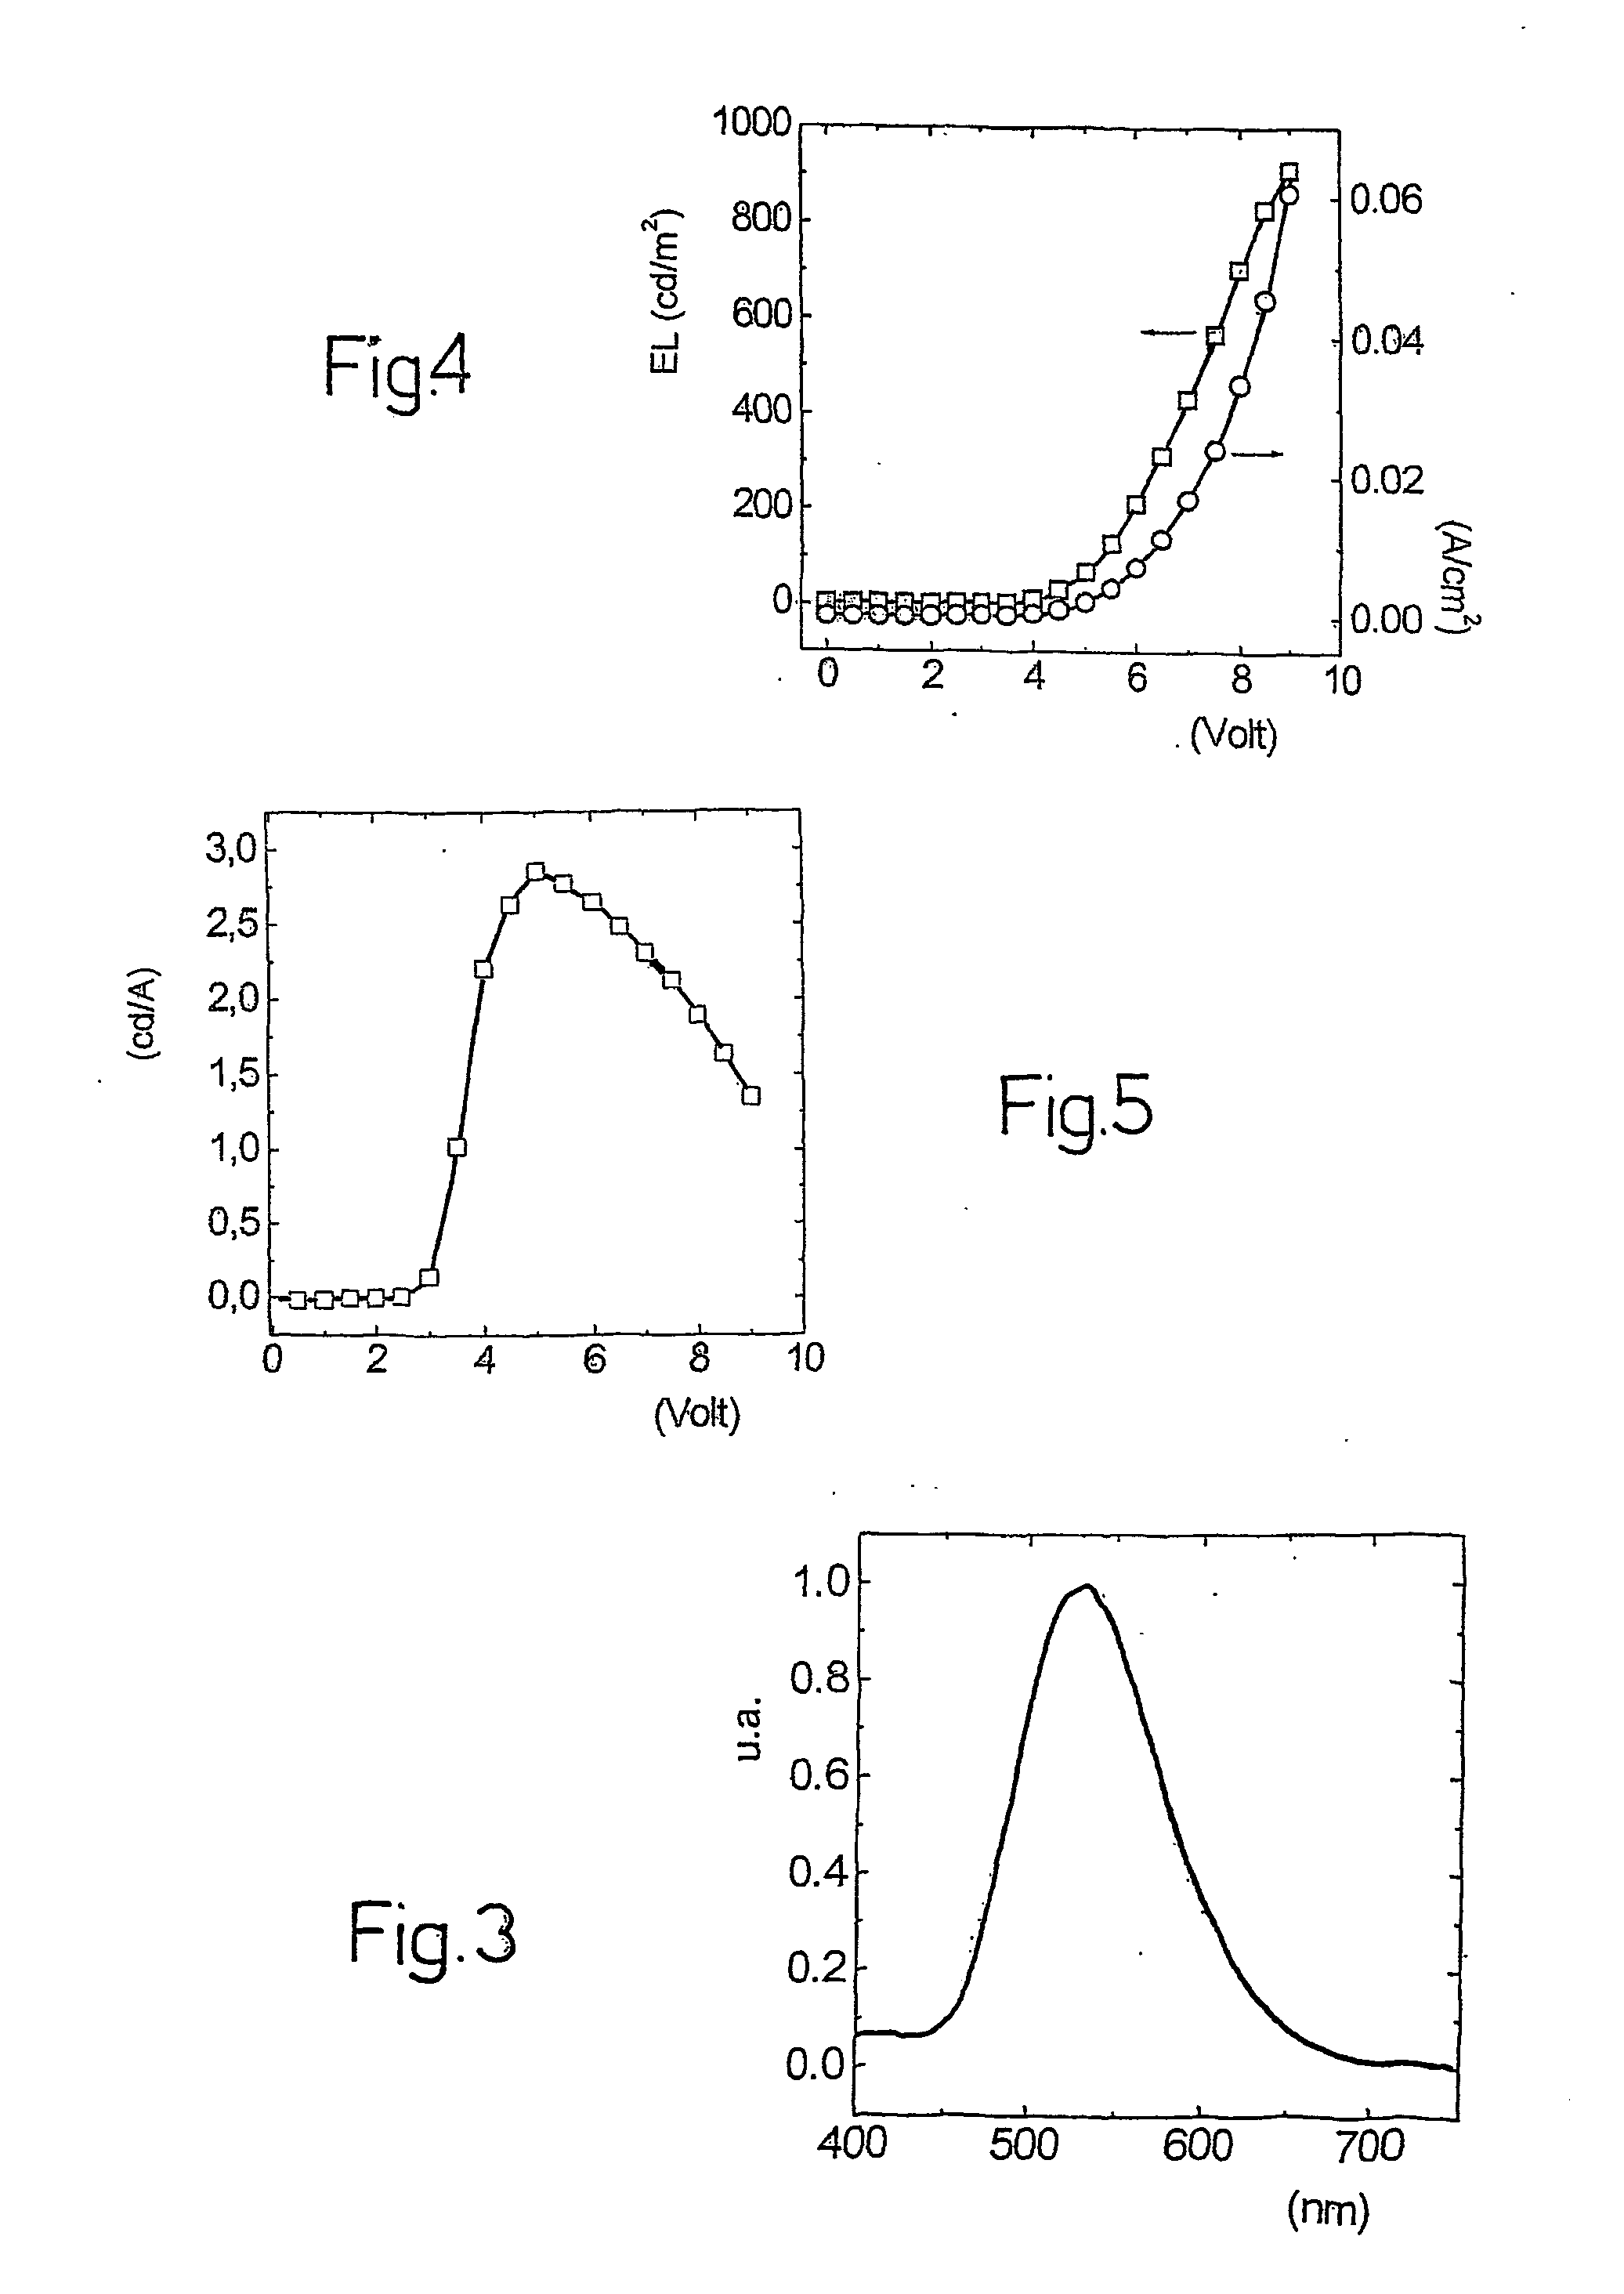 Organic electroluminescent device based upon emission of exciplexes or electroplexes, and a method for its fabrication